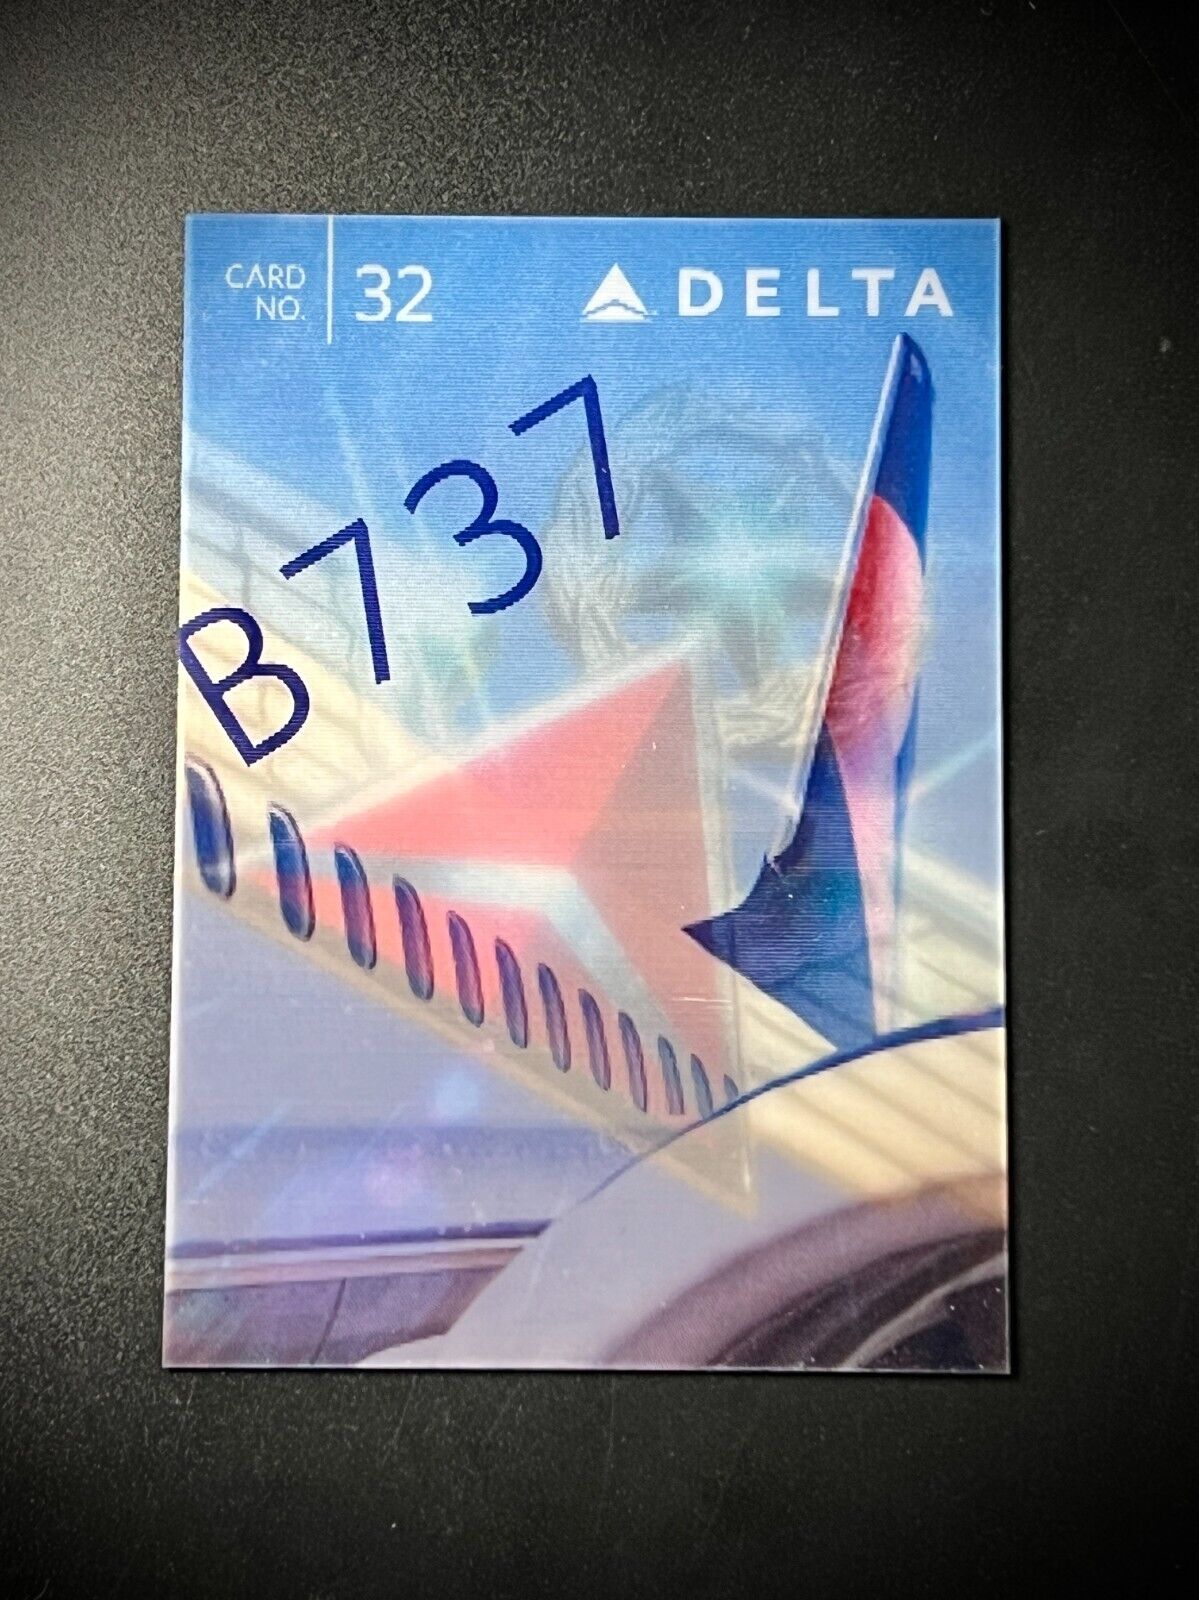 2015 Delta Trading Card Boeing 737-800 #32